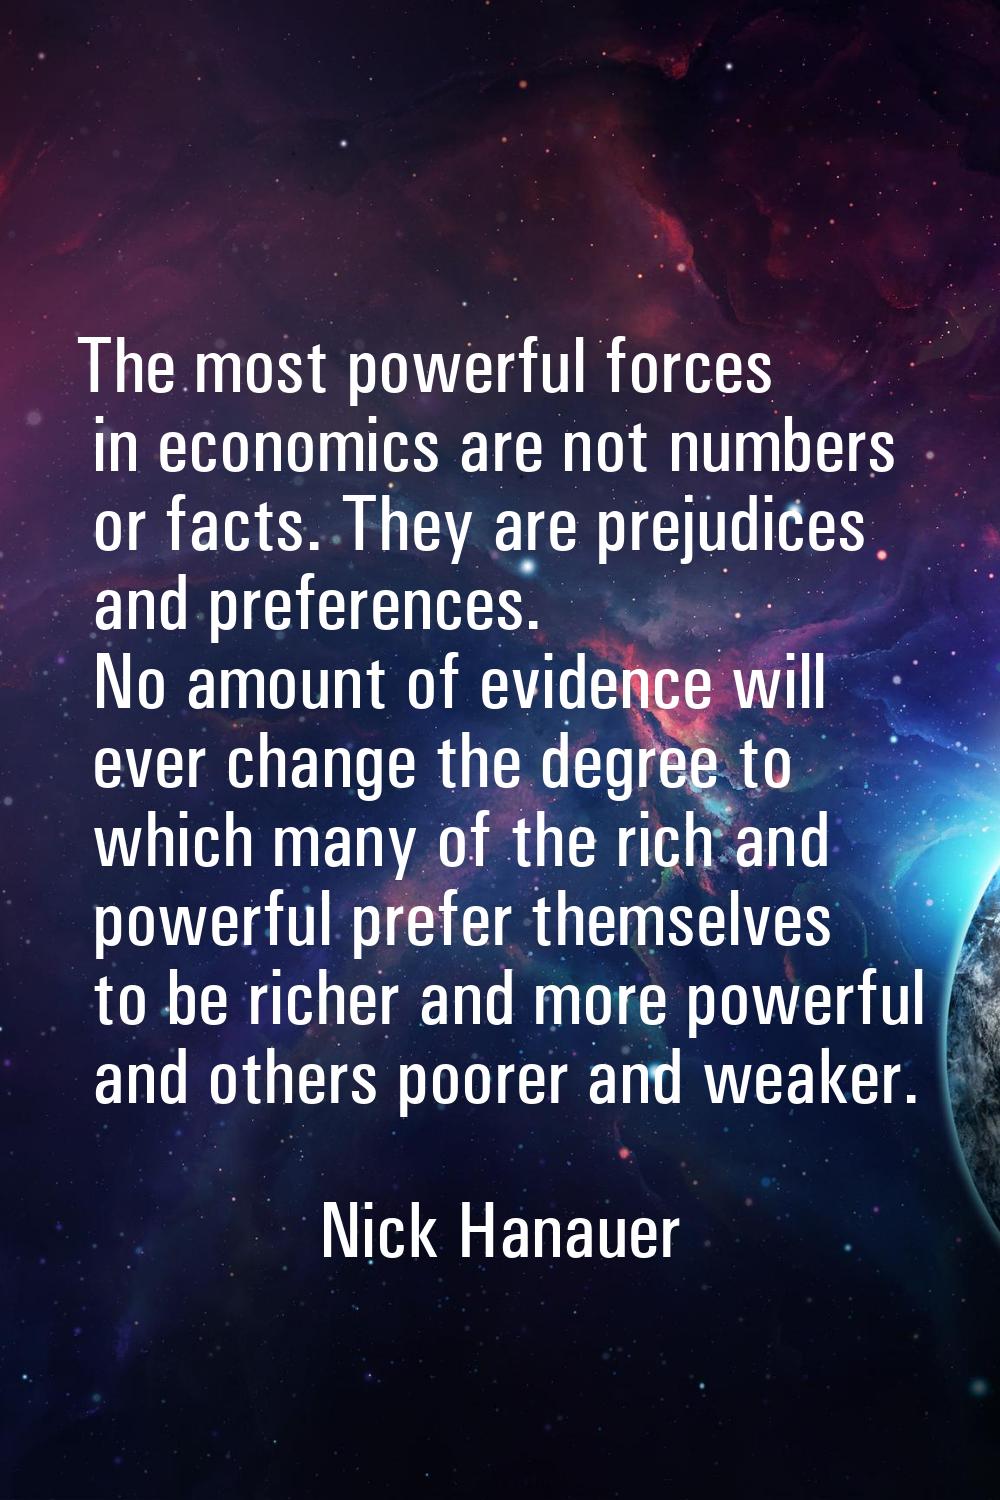 The most powerful forces in economics are not numbers or facts. They are prejudices and preferences